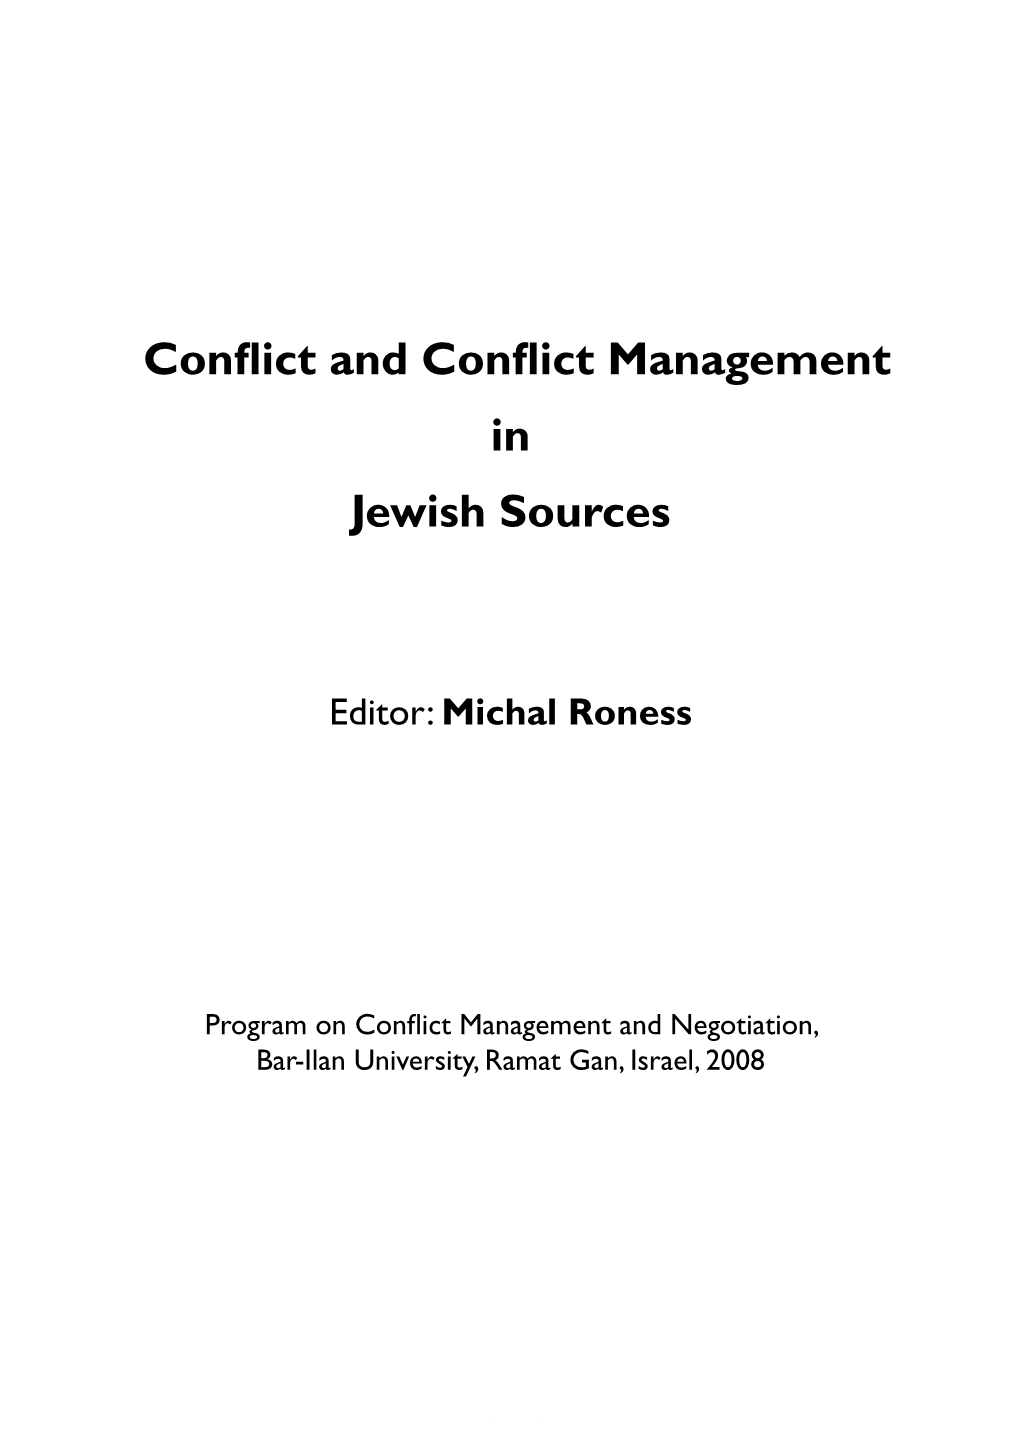 Conflict and Conflict Management in Jewish Sources